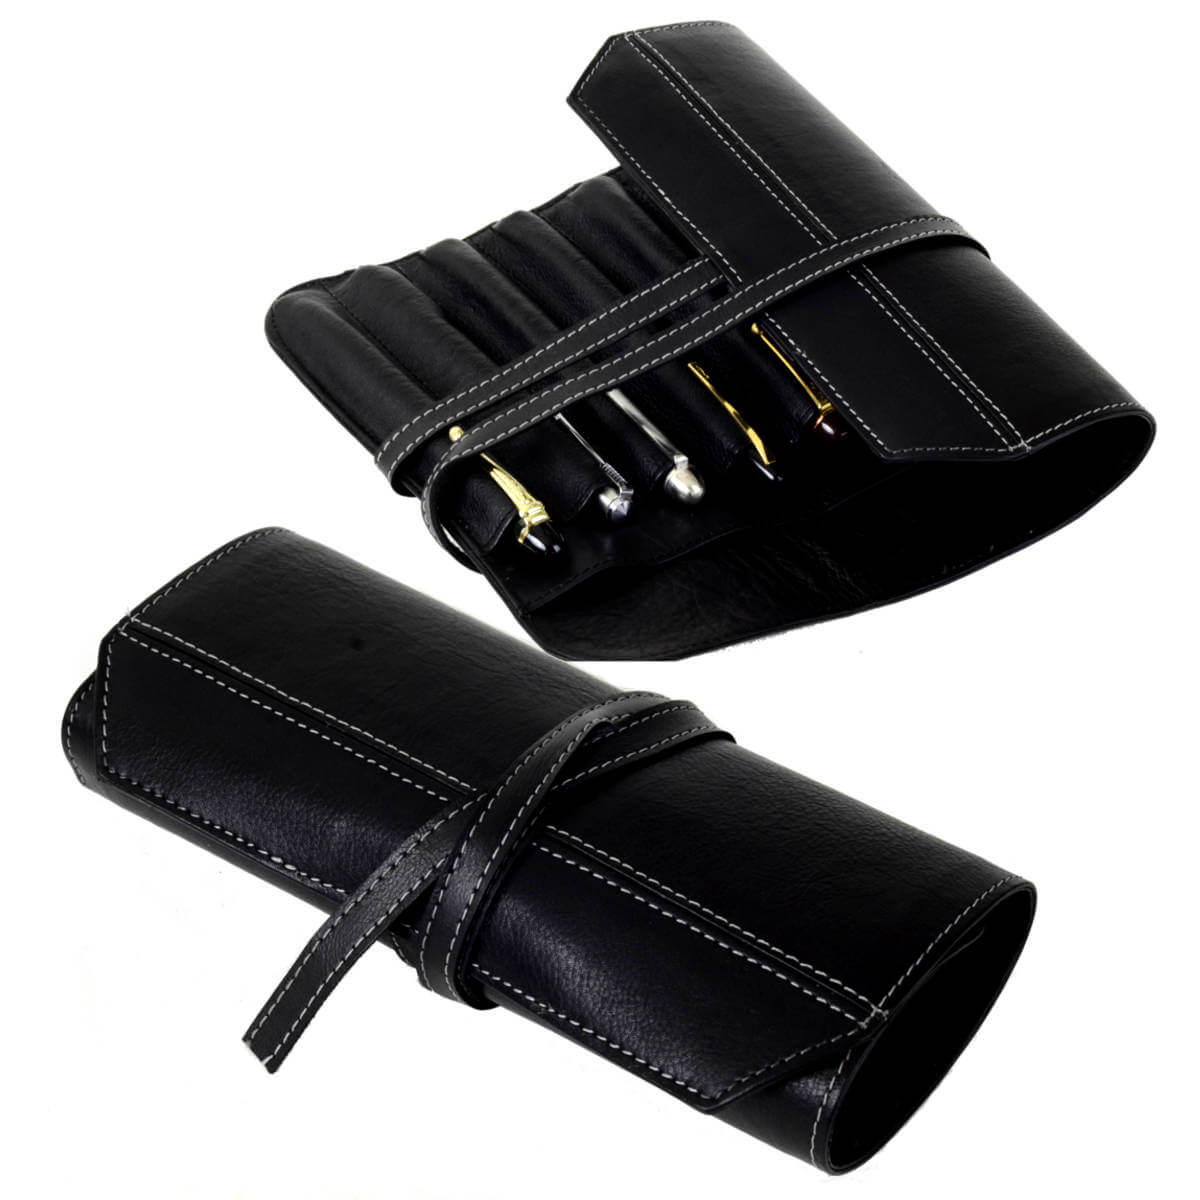 Leather Pen & Pencil Roll | Multifunctional Roll-Up Case (Café)